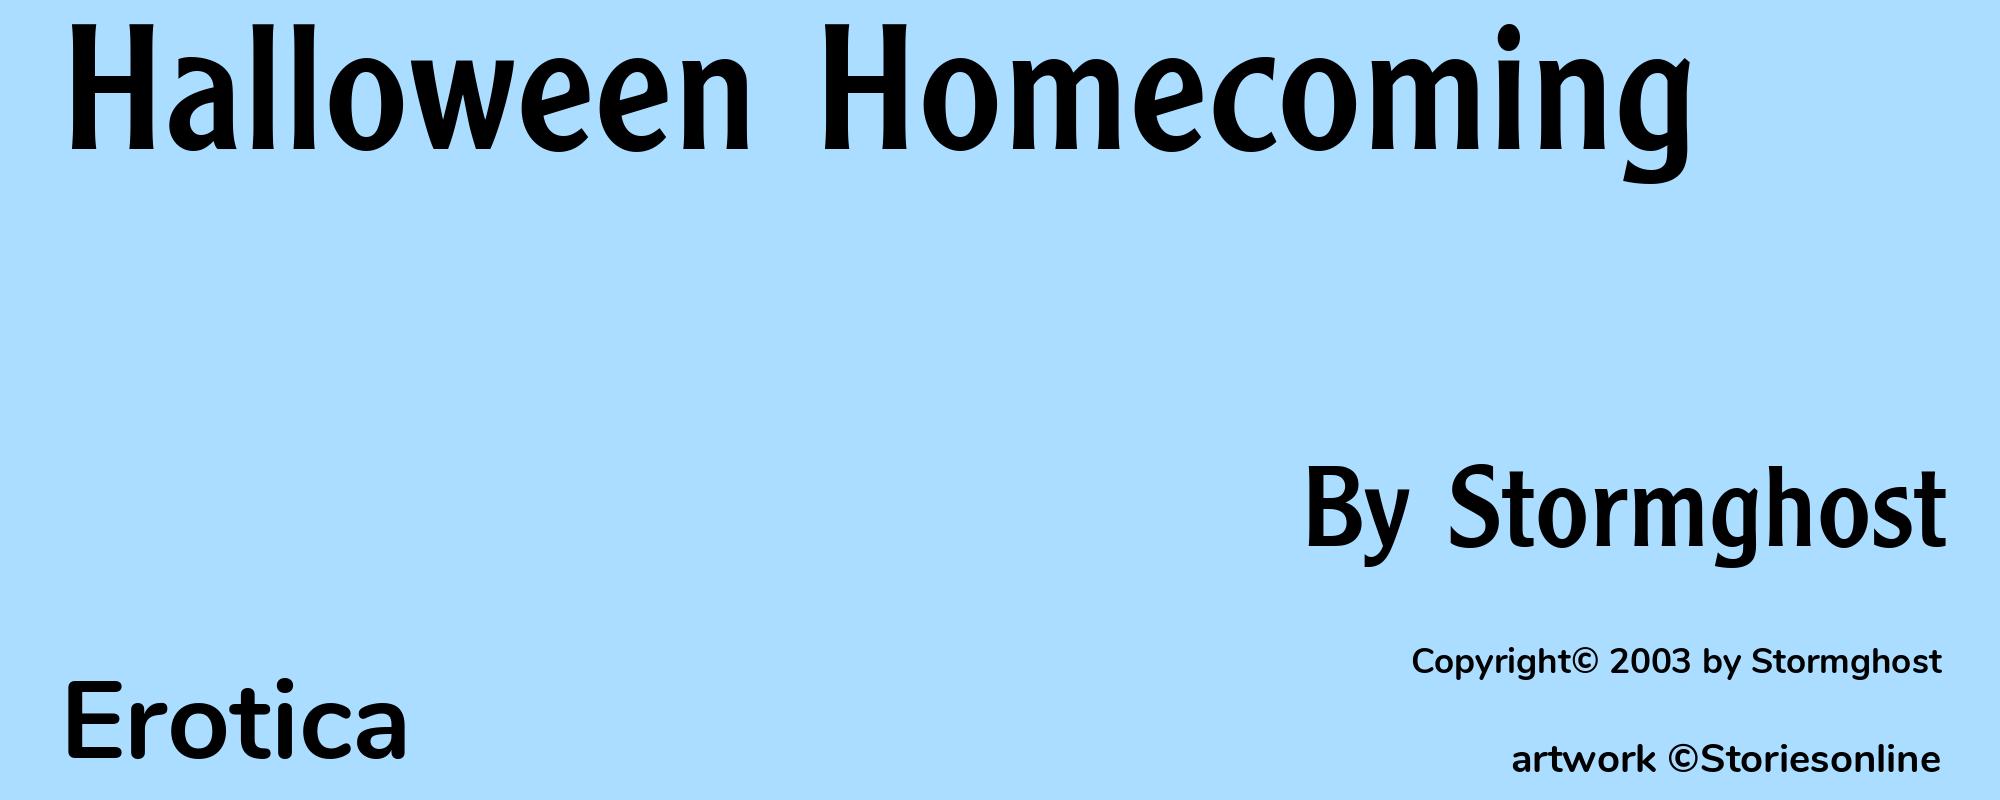 Halloween Homecoming - Cover